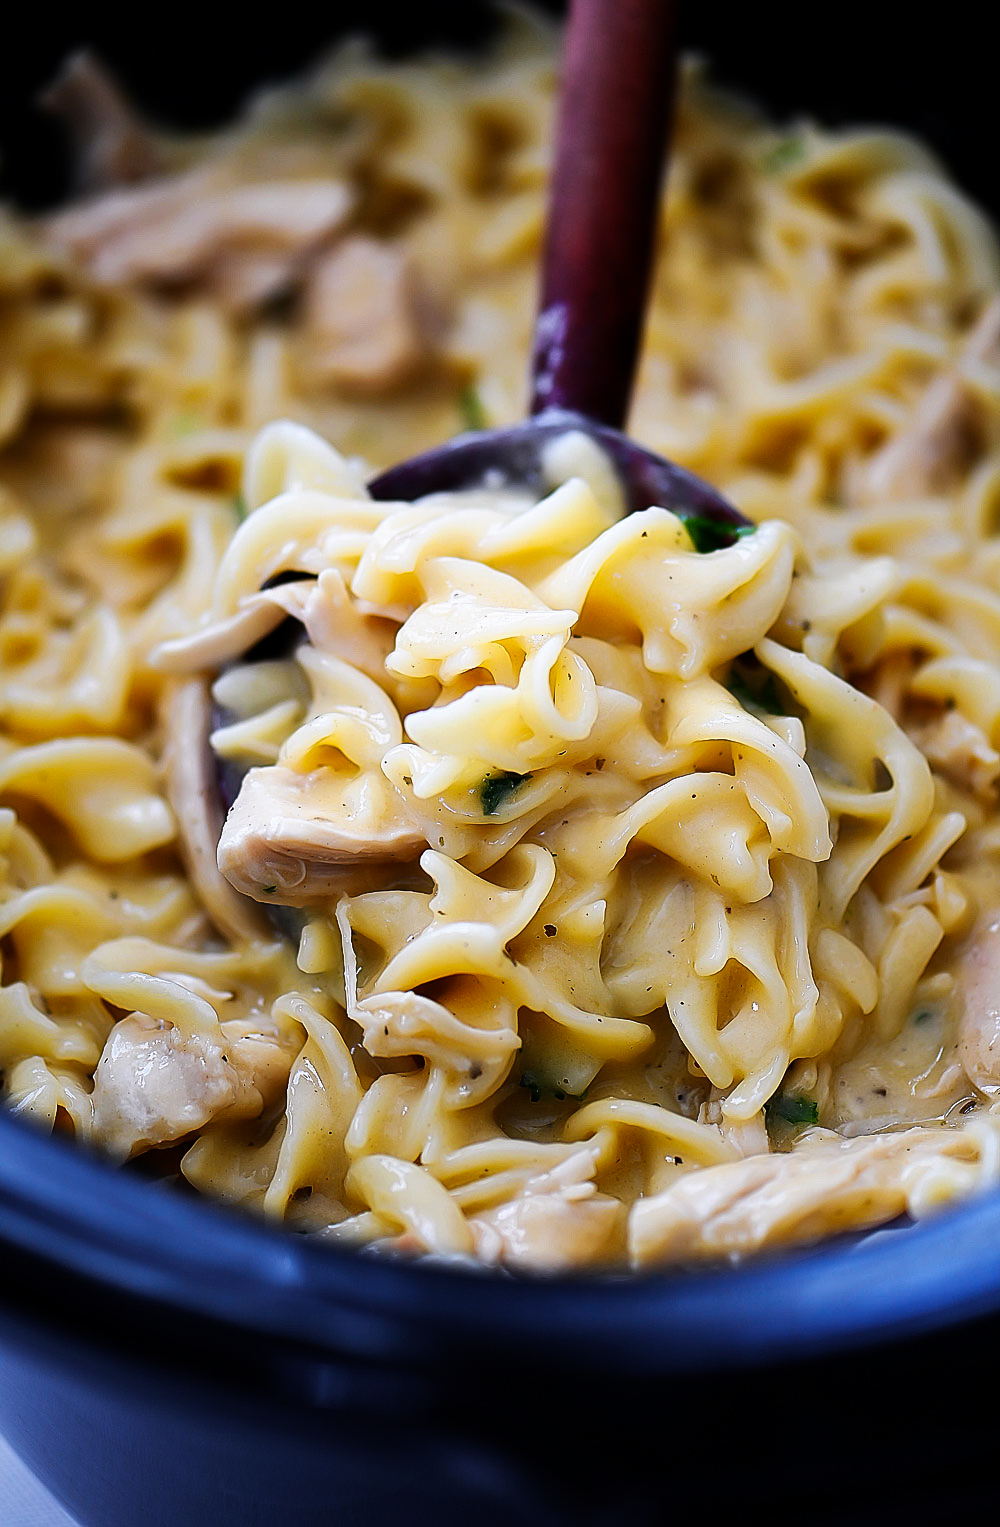 Chicken and egg noodles slow cook in the crock pot with seasonings and broth. Life-in-the-Lofthouse.com